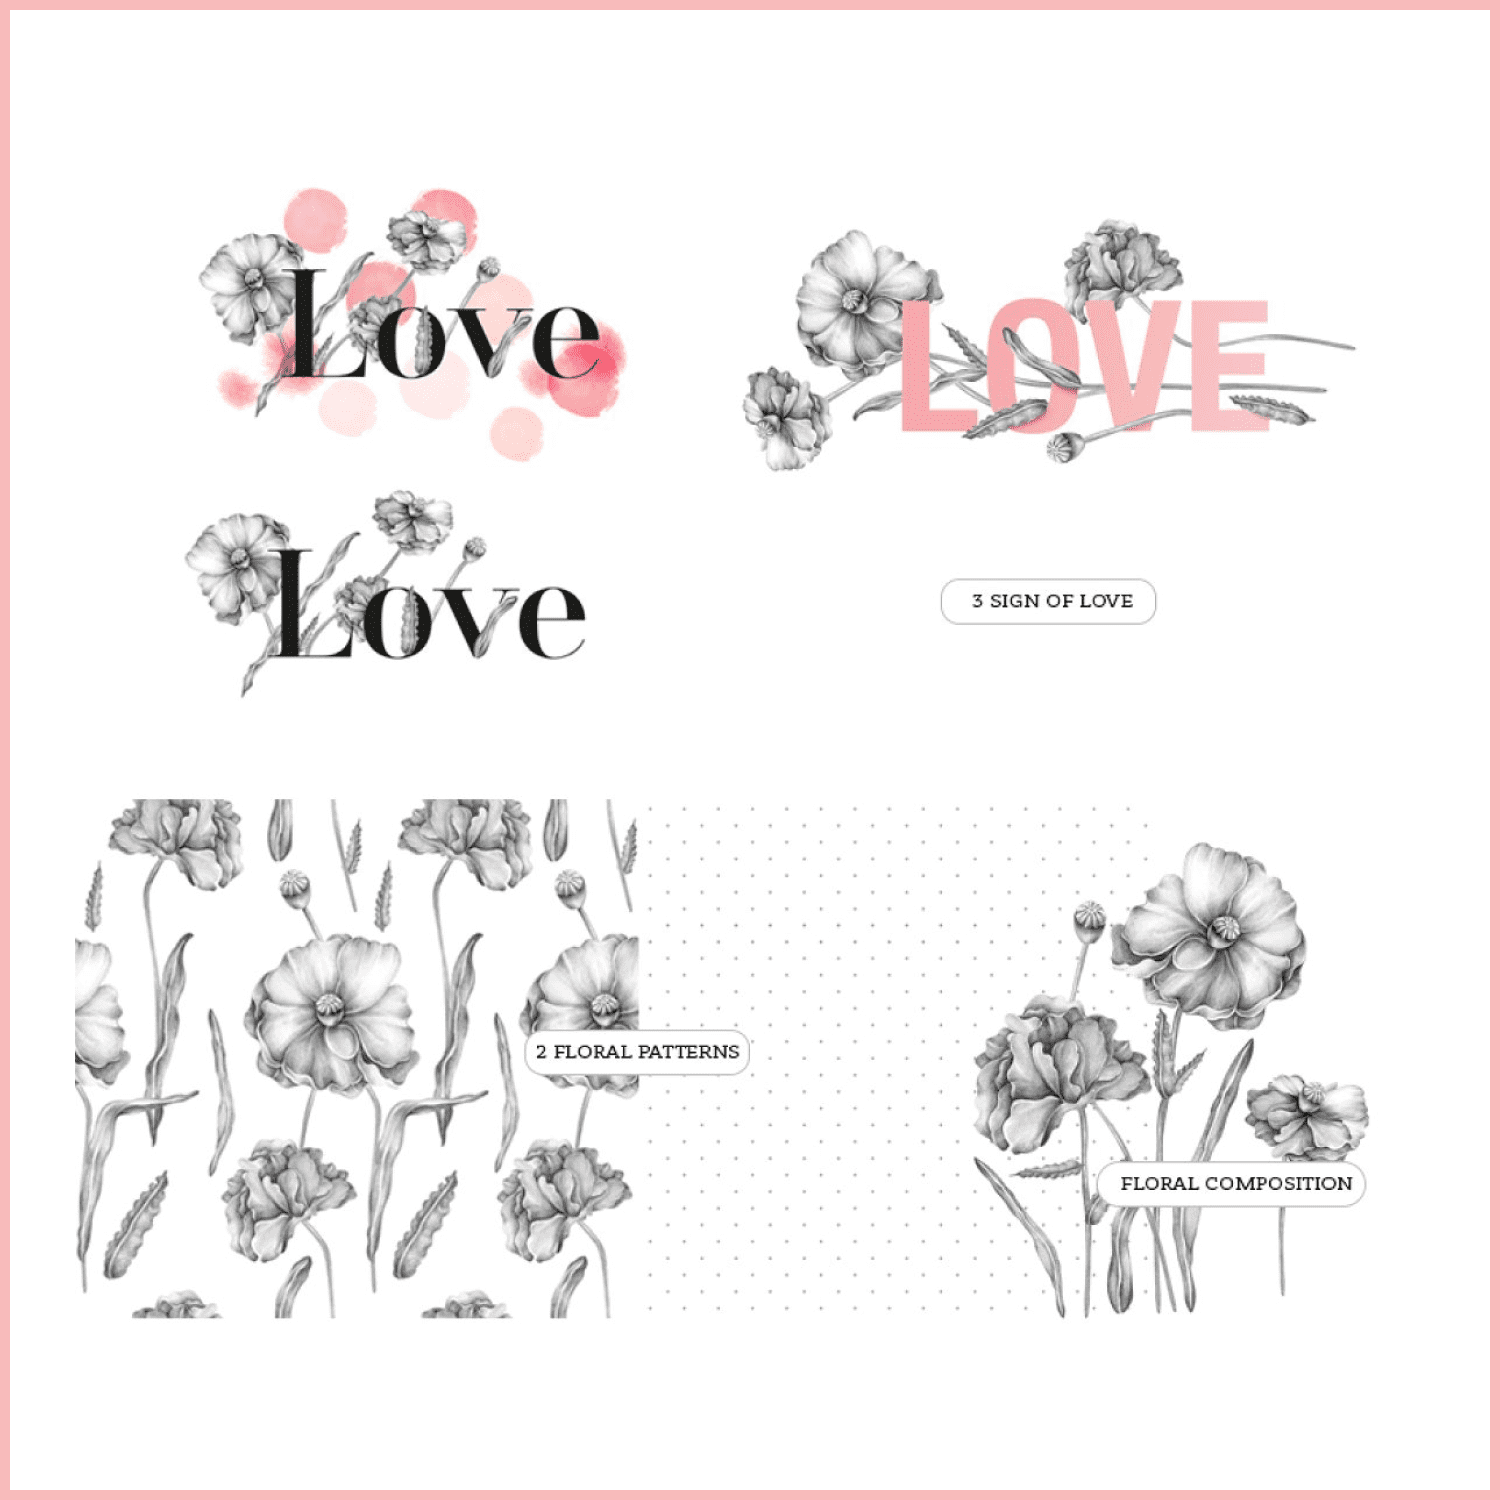 "Love" floral collection cover.